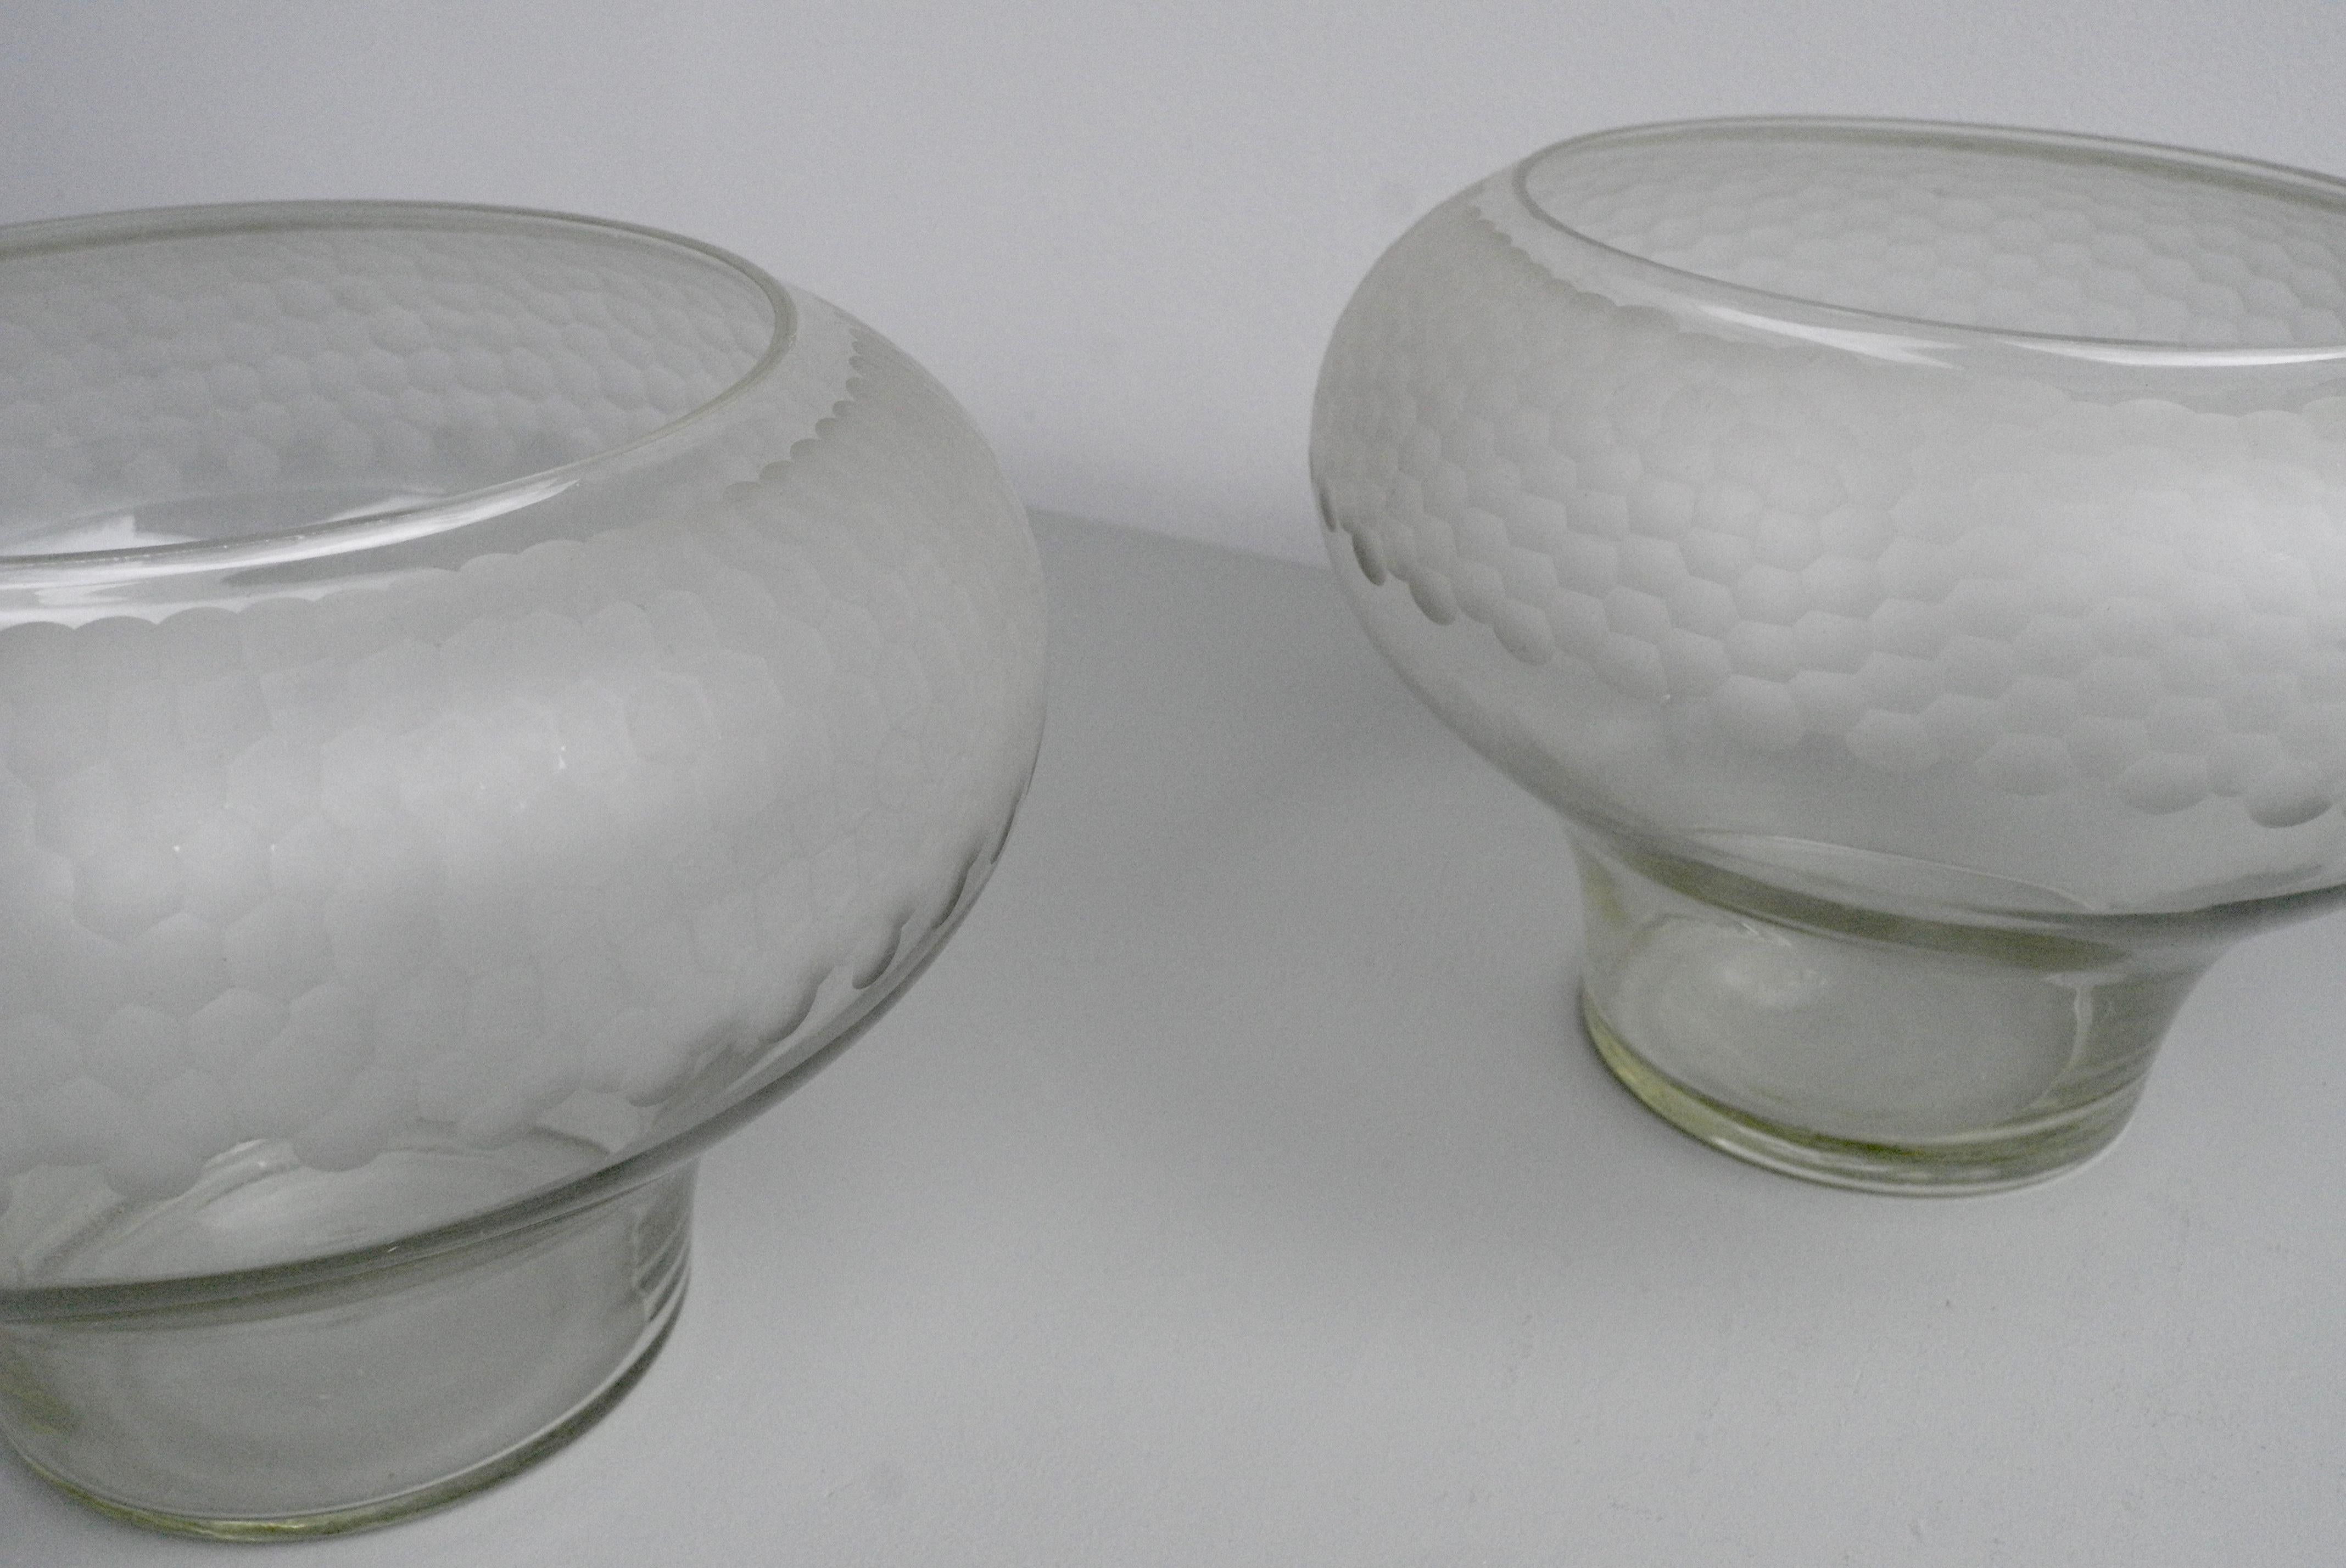 Pair of Large Decorative Honeycomb Midcentury Glass Bowl Vases In Good Condition For Sale In Den Haag, NL